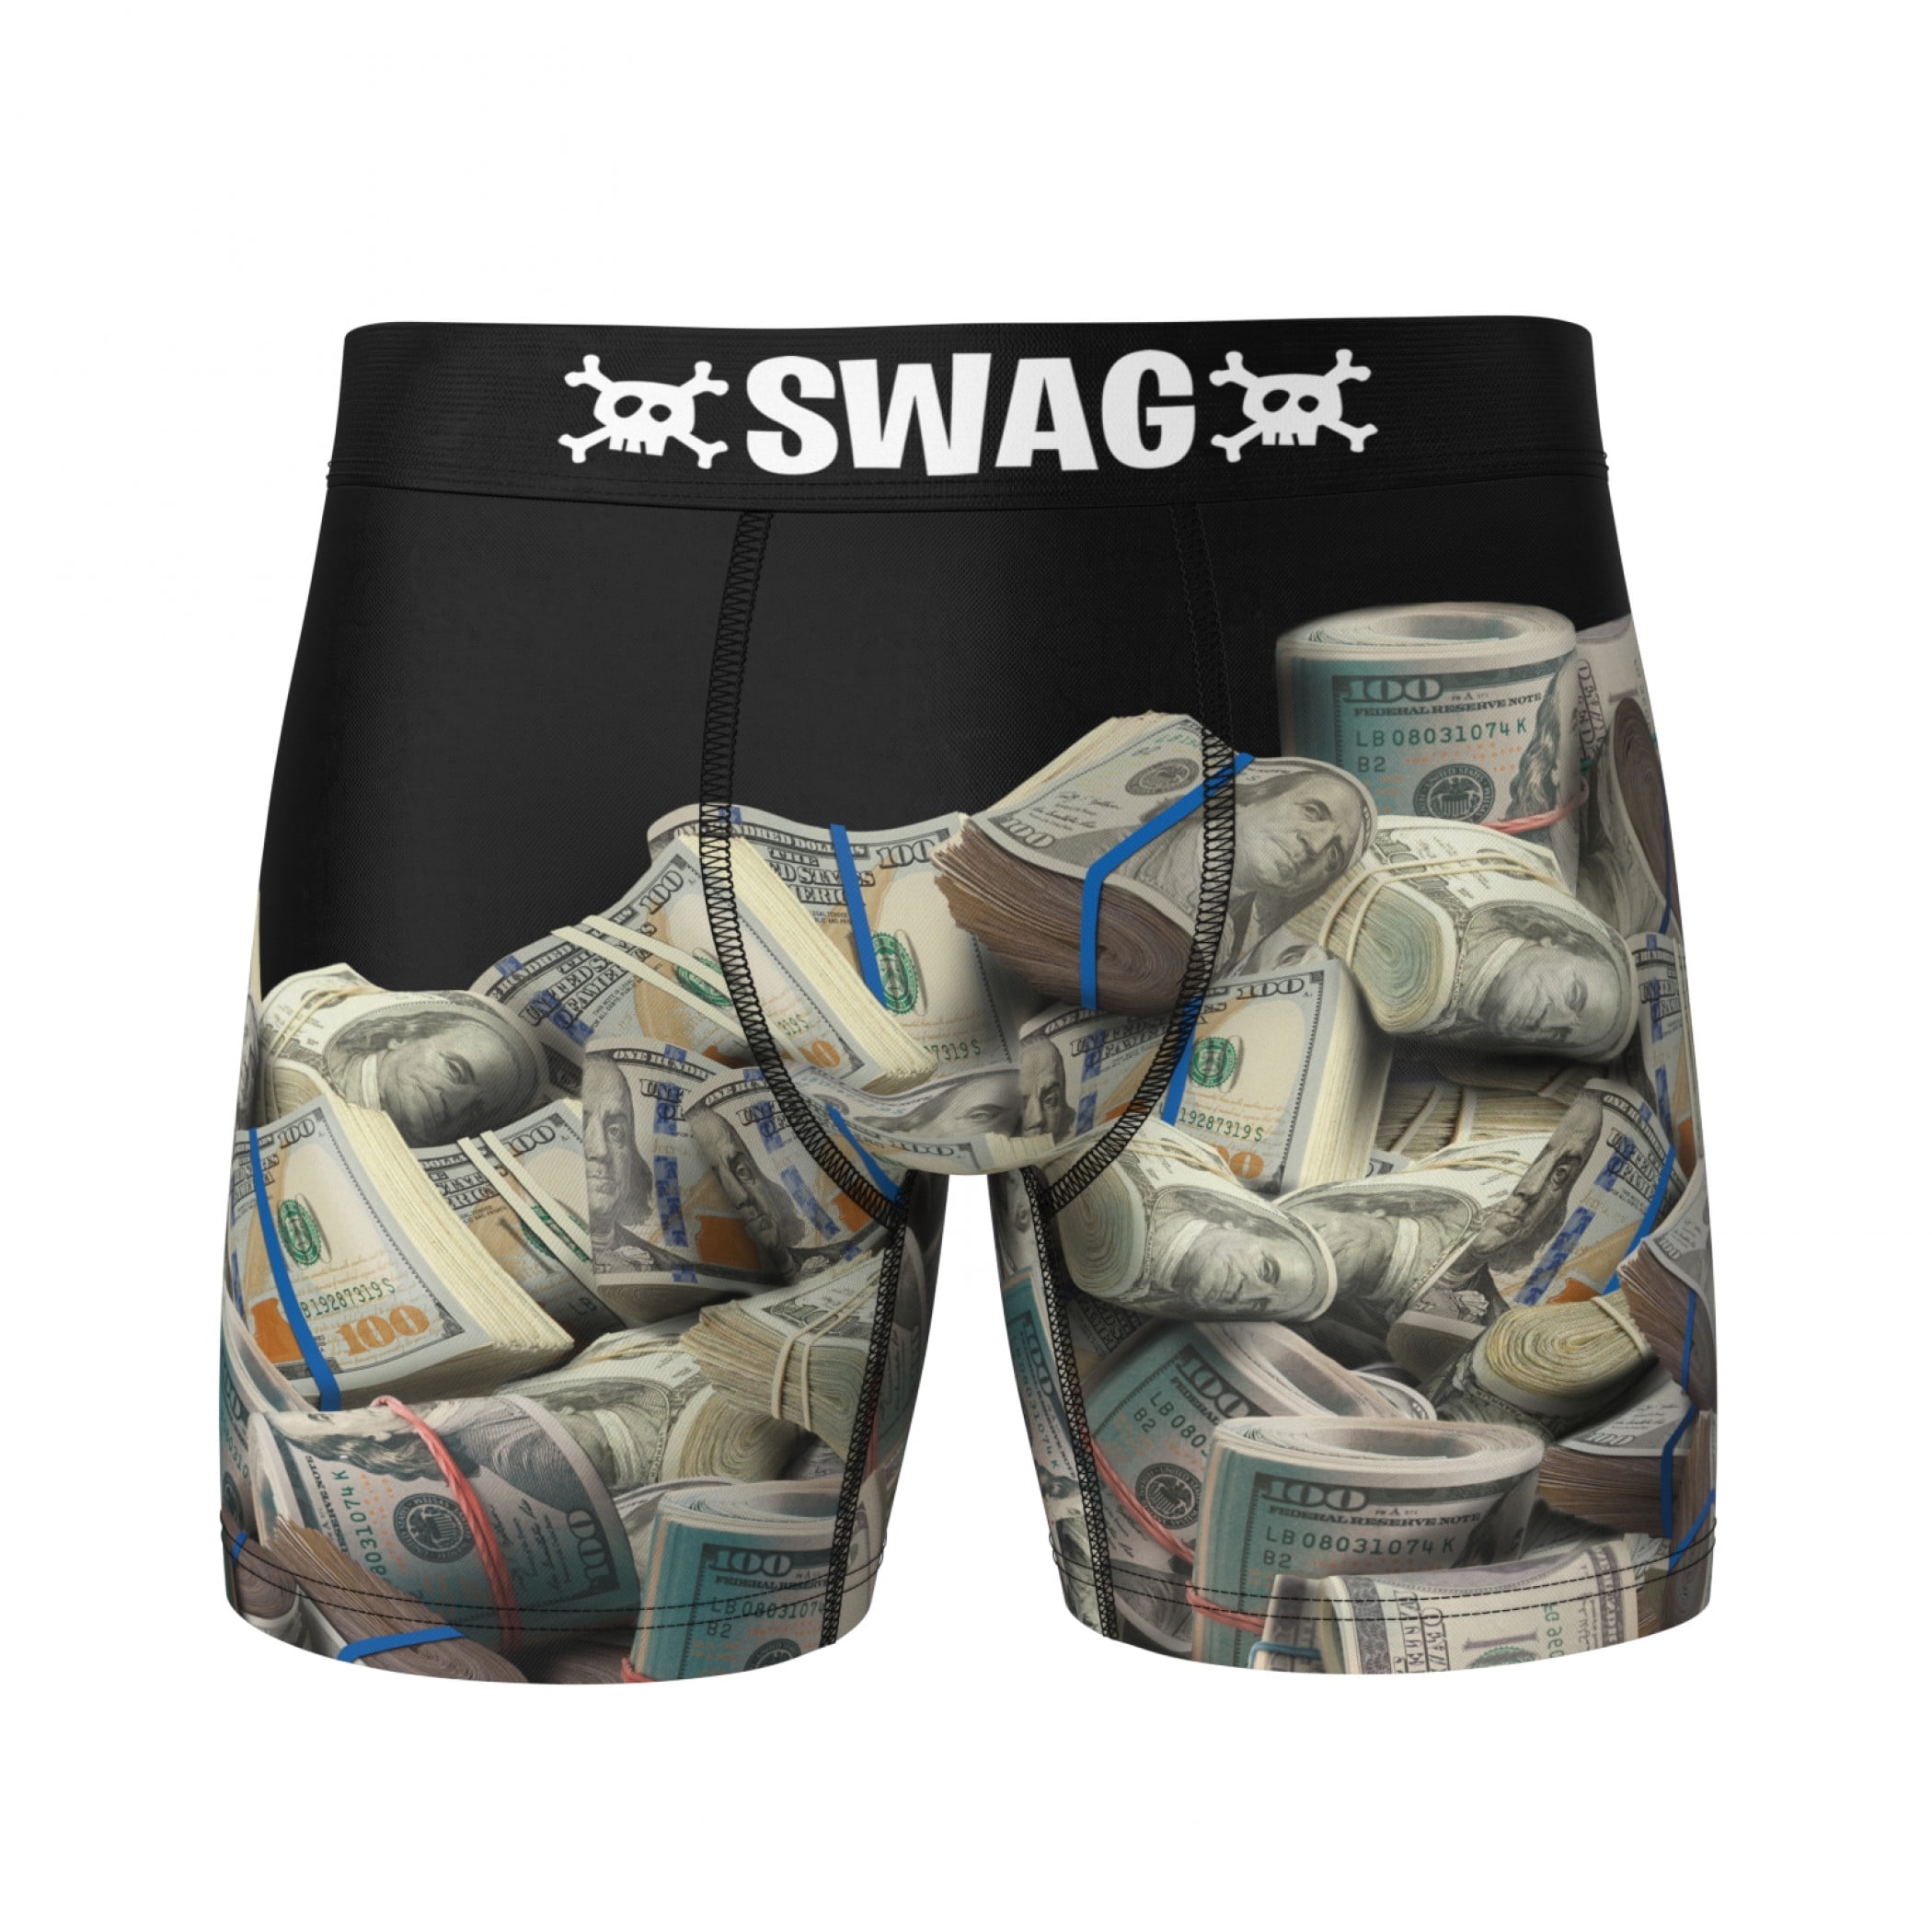 SWAG Boxers  Mens Socks and Boxers - Licensed & Novelty